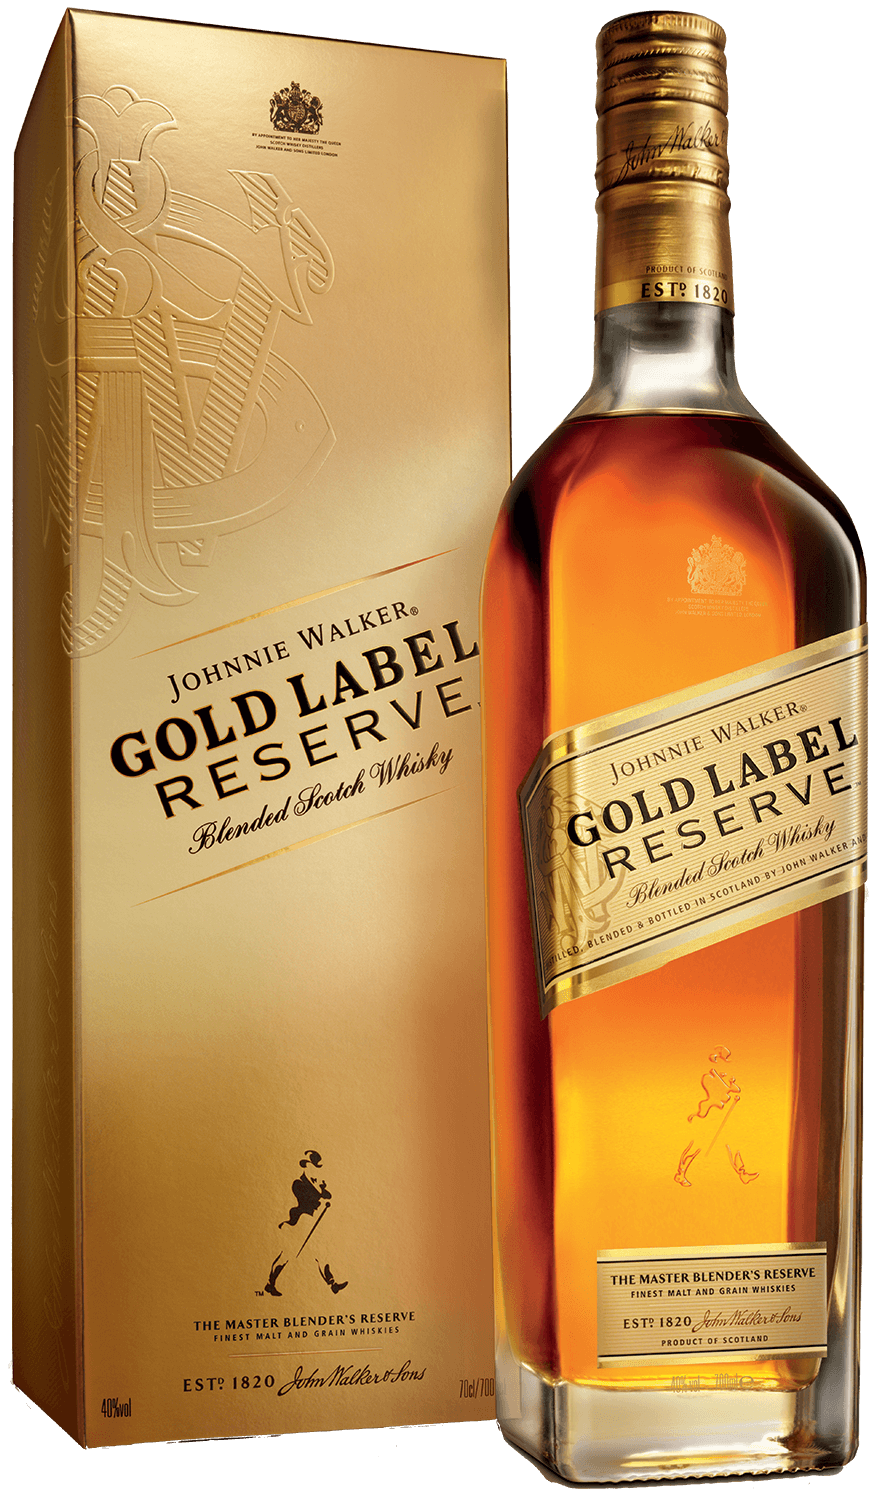 Johnnie Walker Gold Label Blended Scotch Whisky (gift box) johnnie walker red label blended scotch whisky gift box with 1 glass